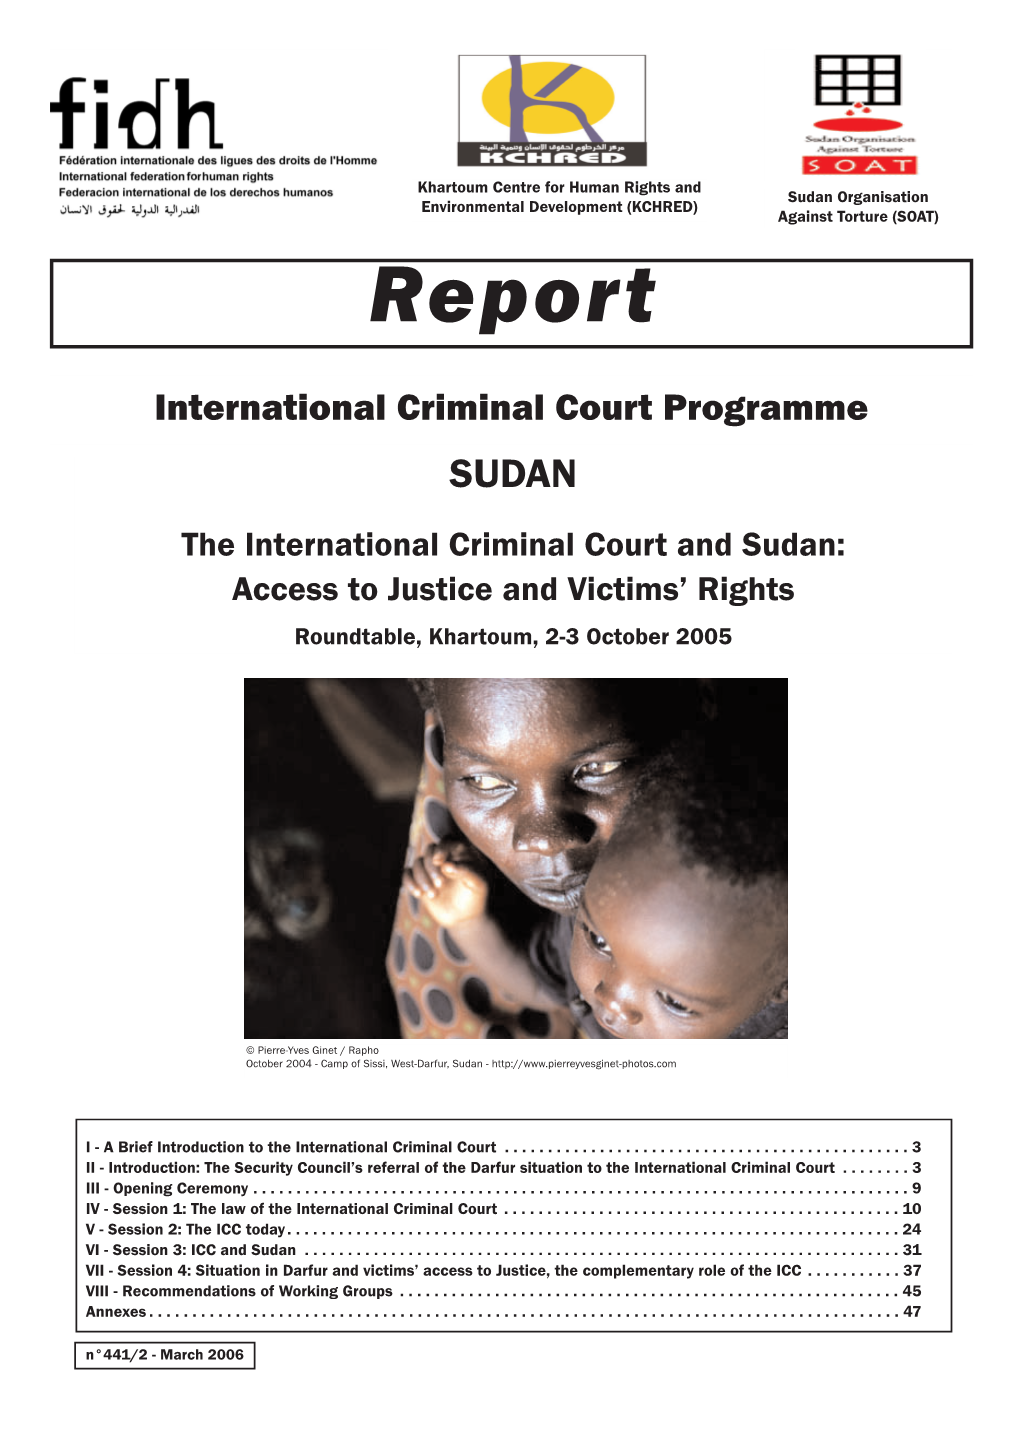 The International Criminal Court and Sudan: Access to Justice and Victims’ Rights Roundtable, Khartoum, 2-3 October 2005